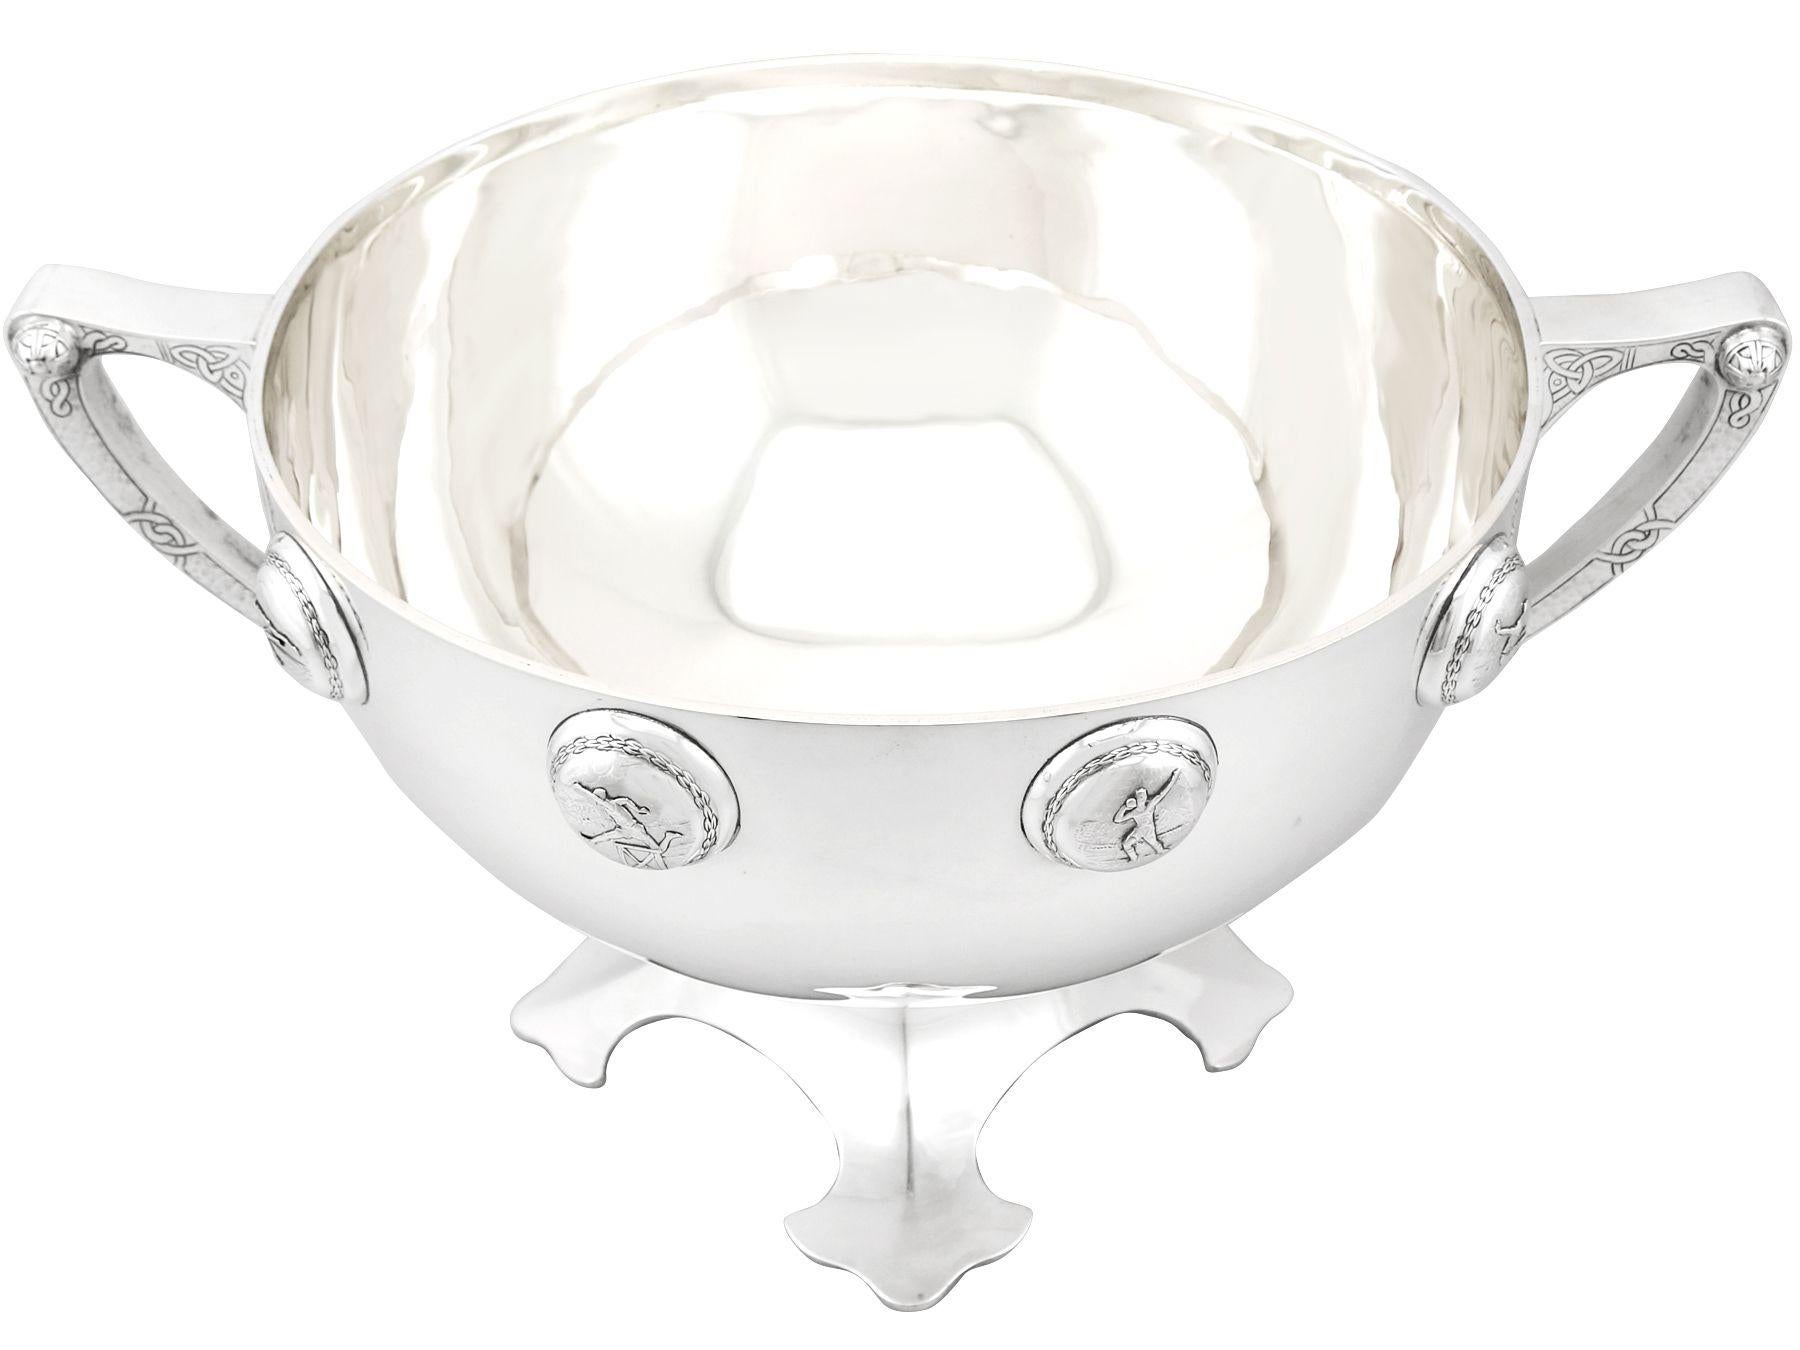 Antique Sterling Silver Presentation Bowl, 1937 In Excellent Condition For Sale In Jesmond, Newcastle Upon Tyne